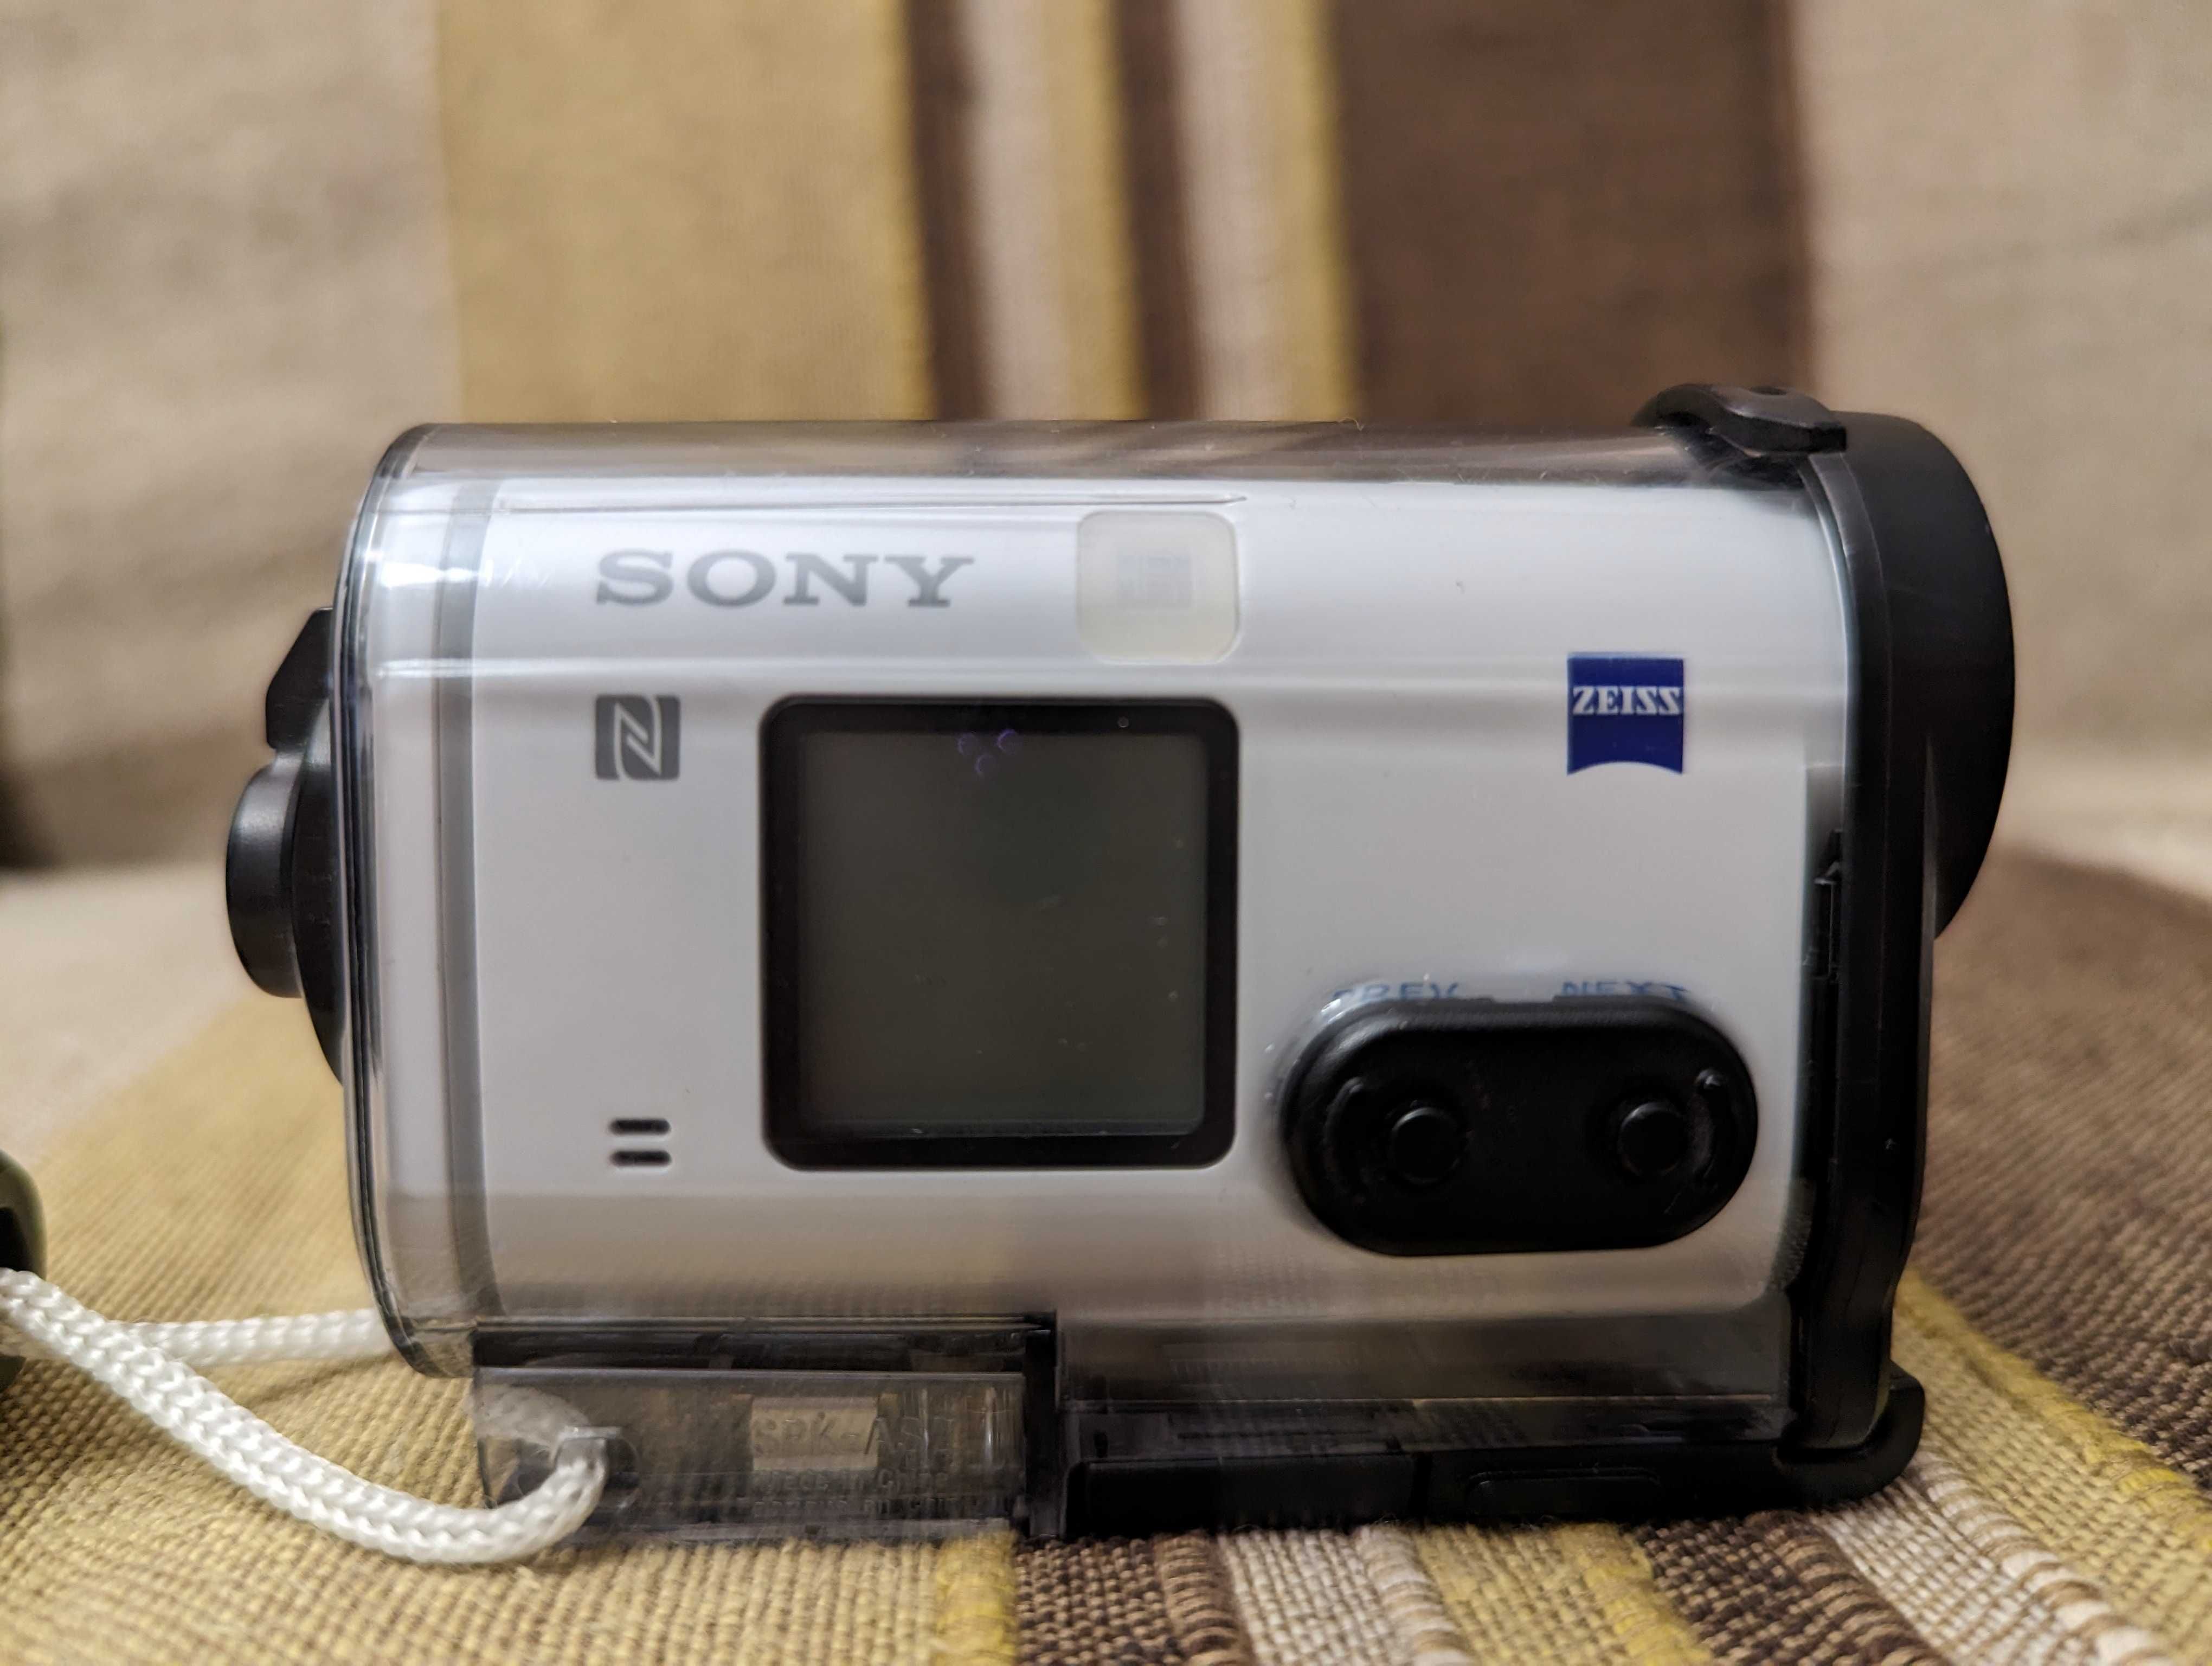 Sony AS200V Action Cam